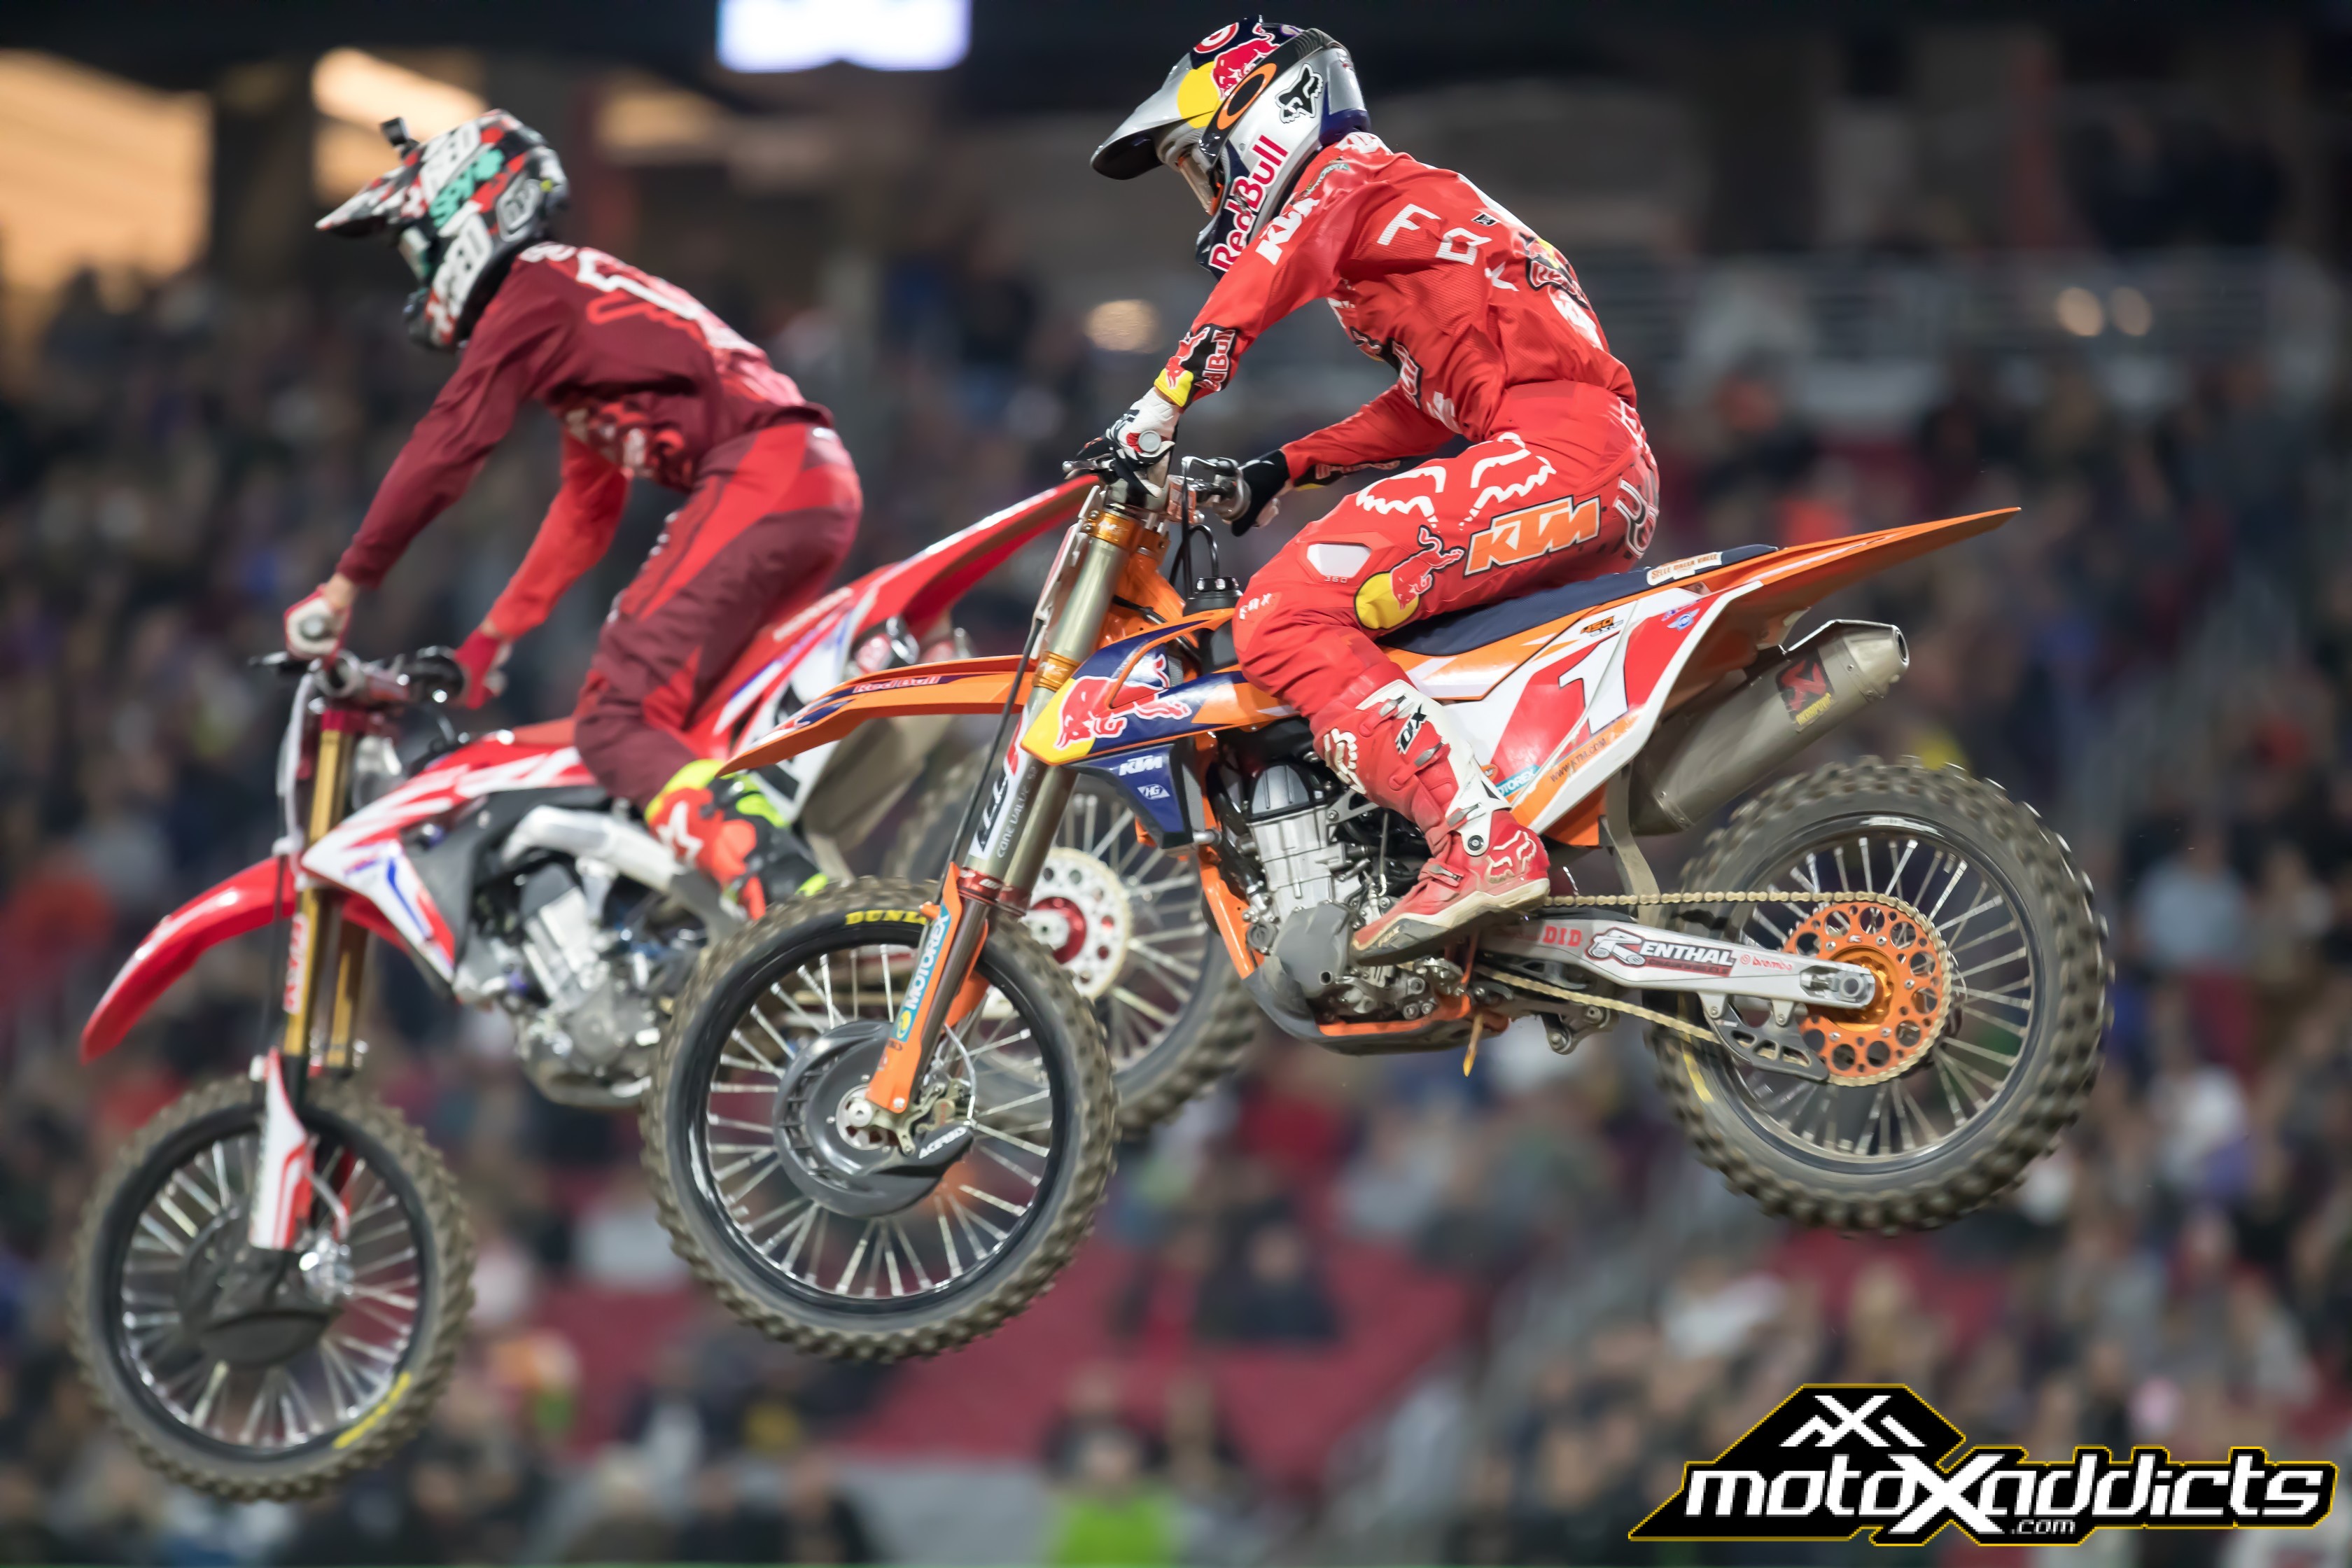 Seely #14 and Dungey #1 were locked in battles all night long in both the heat race and main event. 